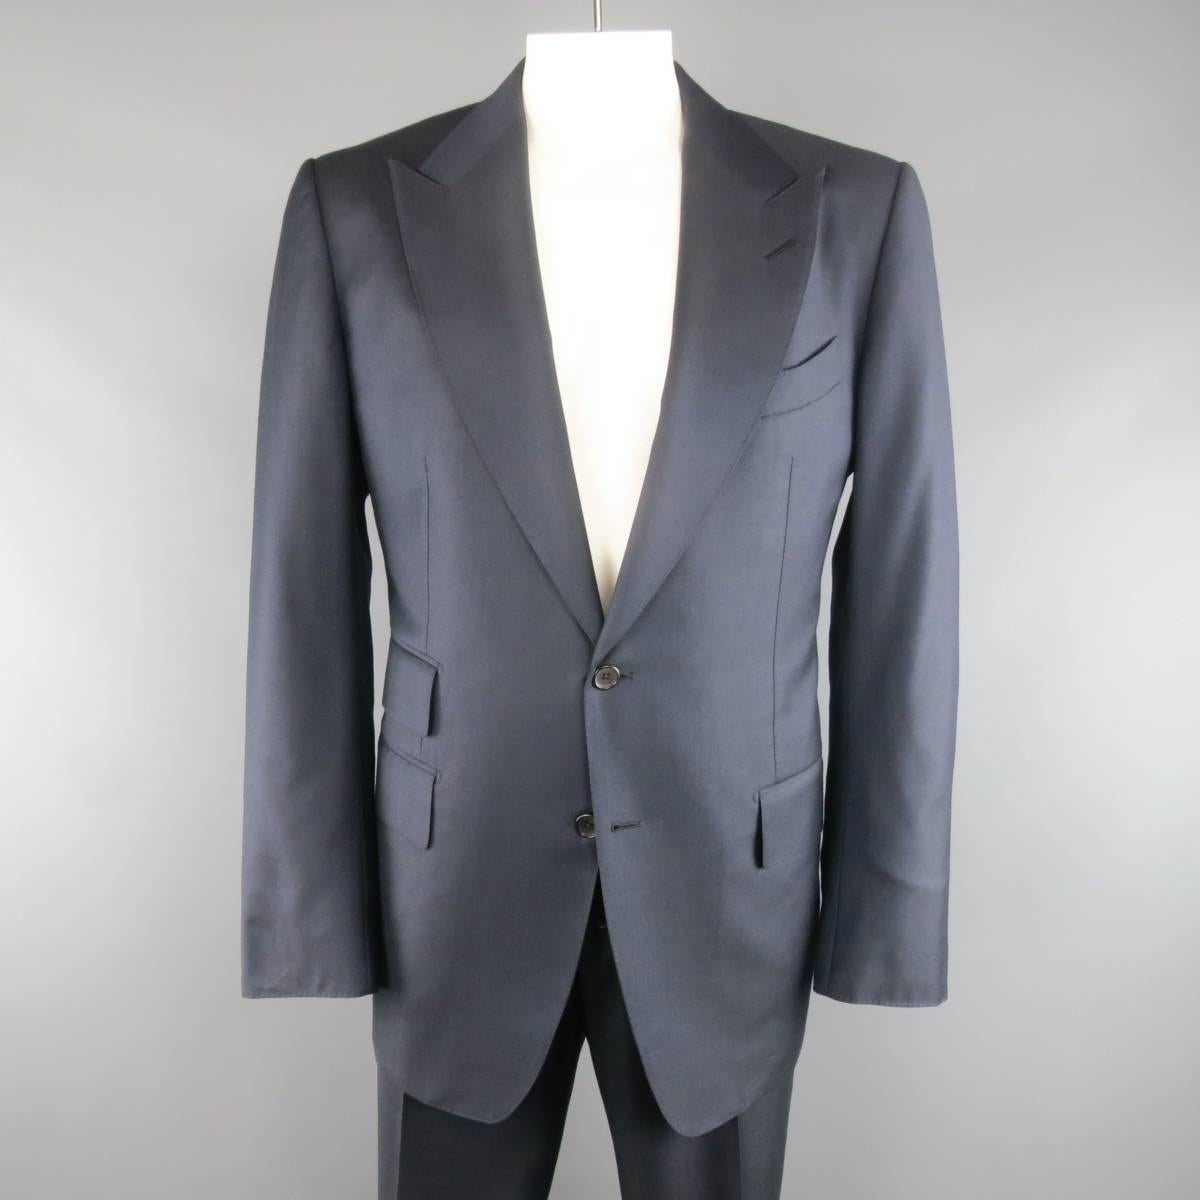 TOM FORD suit comes in a navy blue wool and includes a two button sport coat with peak lapel, three flap pockets, and functional button cuffs with matching adjustable tab waistband dress pants with cuffed hem. Made in Italy.
 
Excellent Pre-Owned